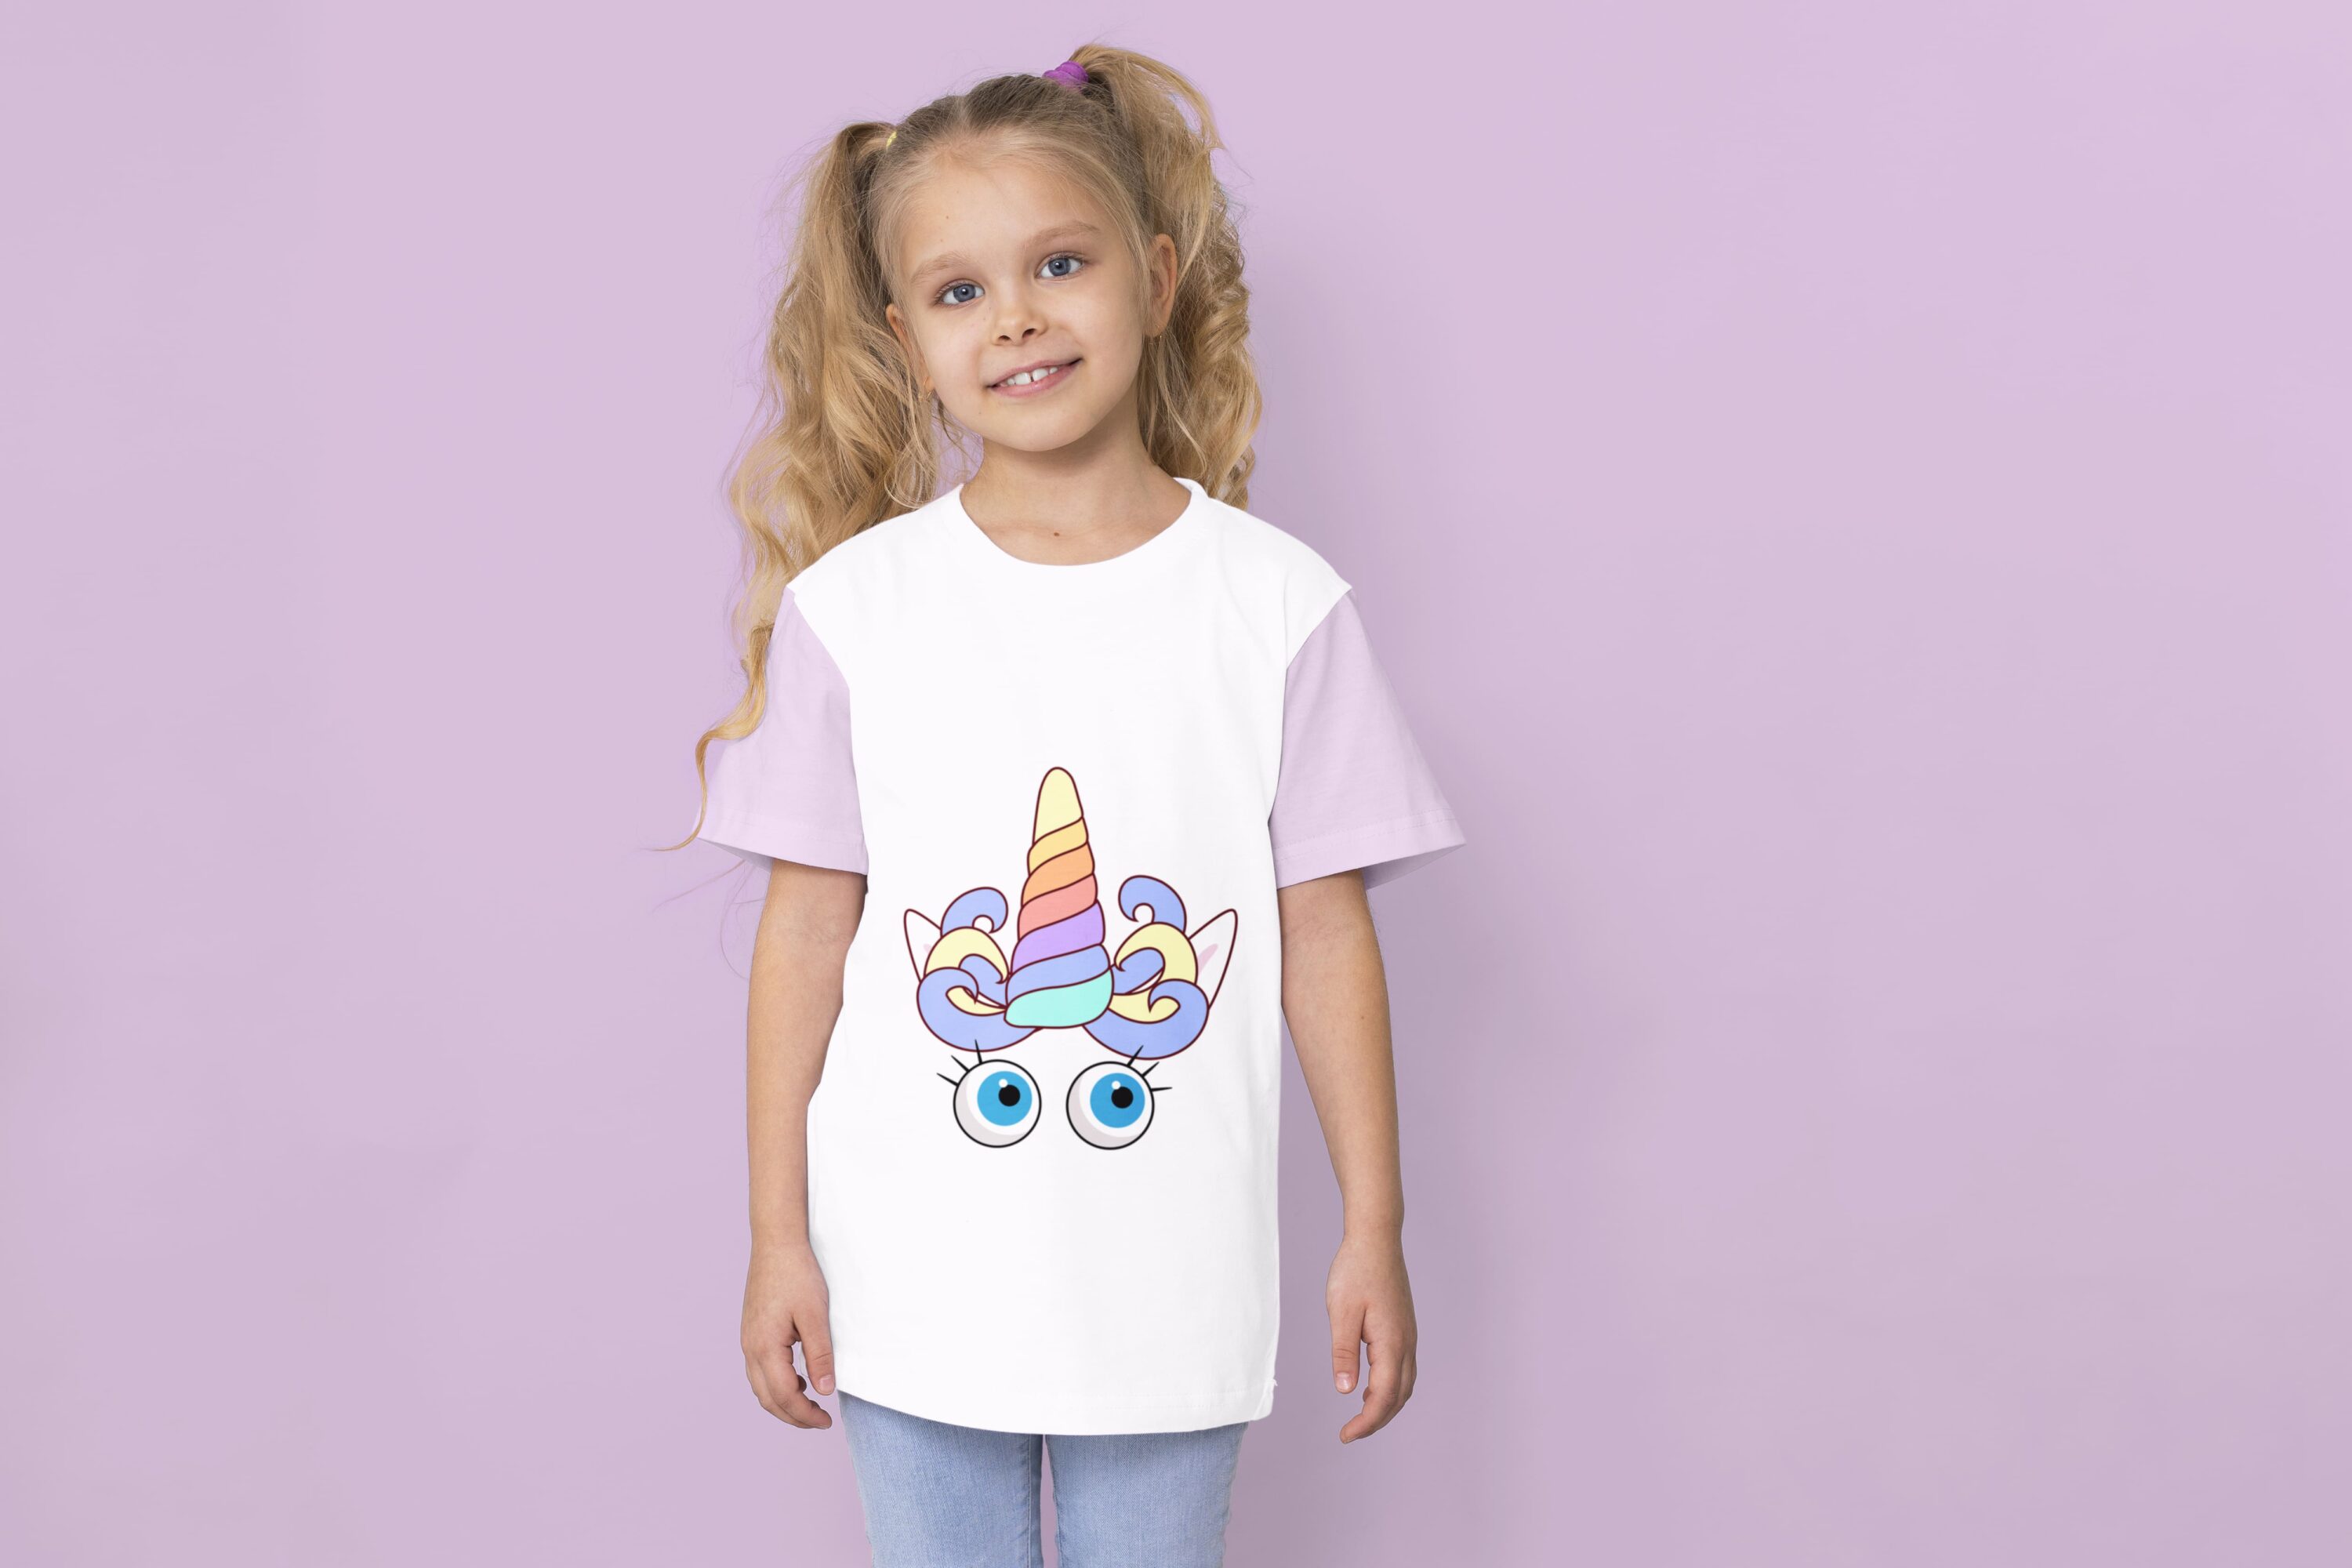 A white t-shirt with lavender sleeves and a colorful unicorn horn with blue eyes on a girl against a lavender background.